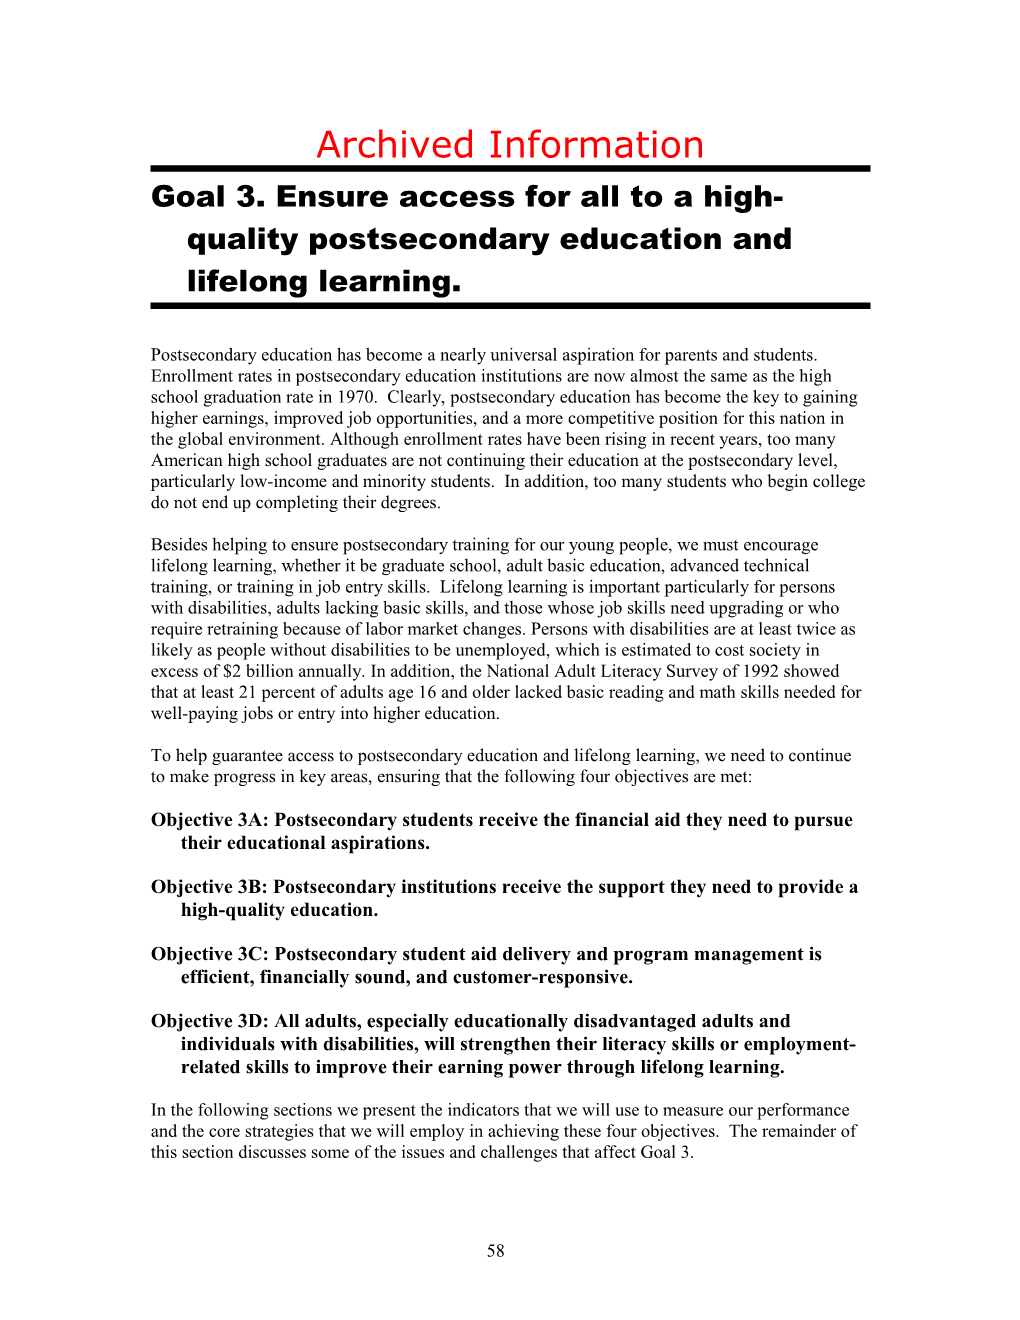 Archived - Goal 3. Ensure Access for All to a High-Quality Postsecondary Education And